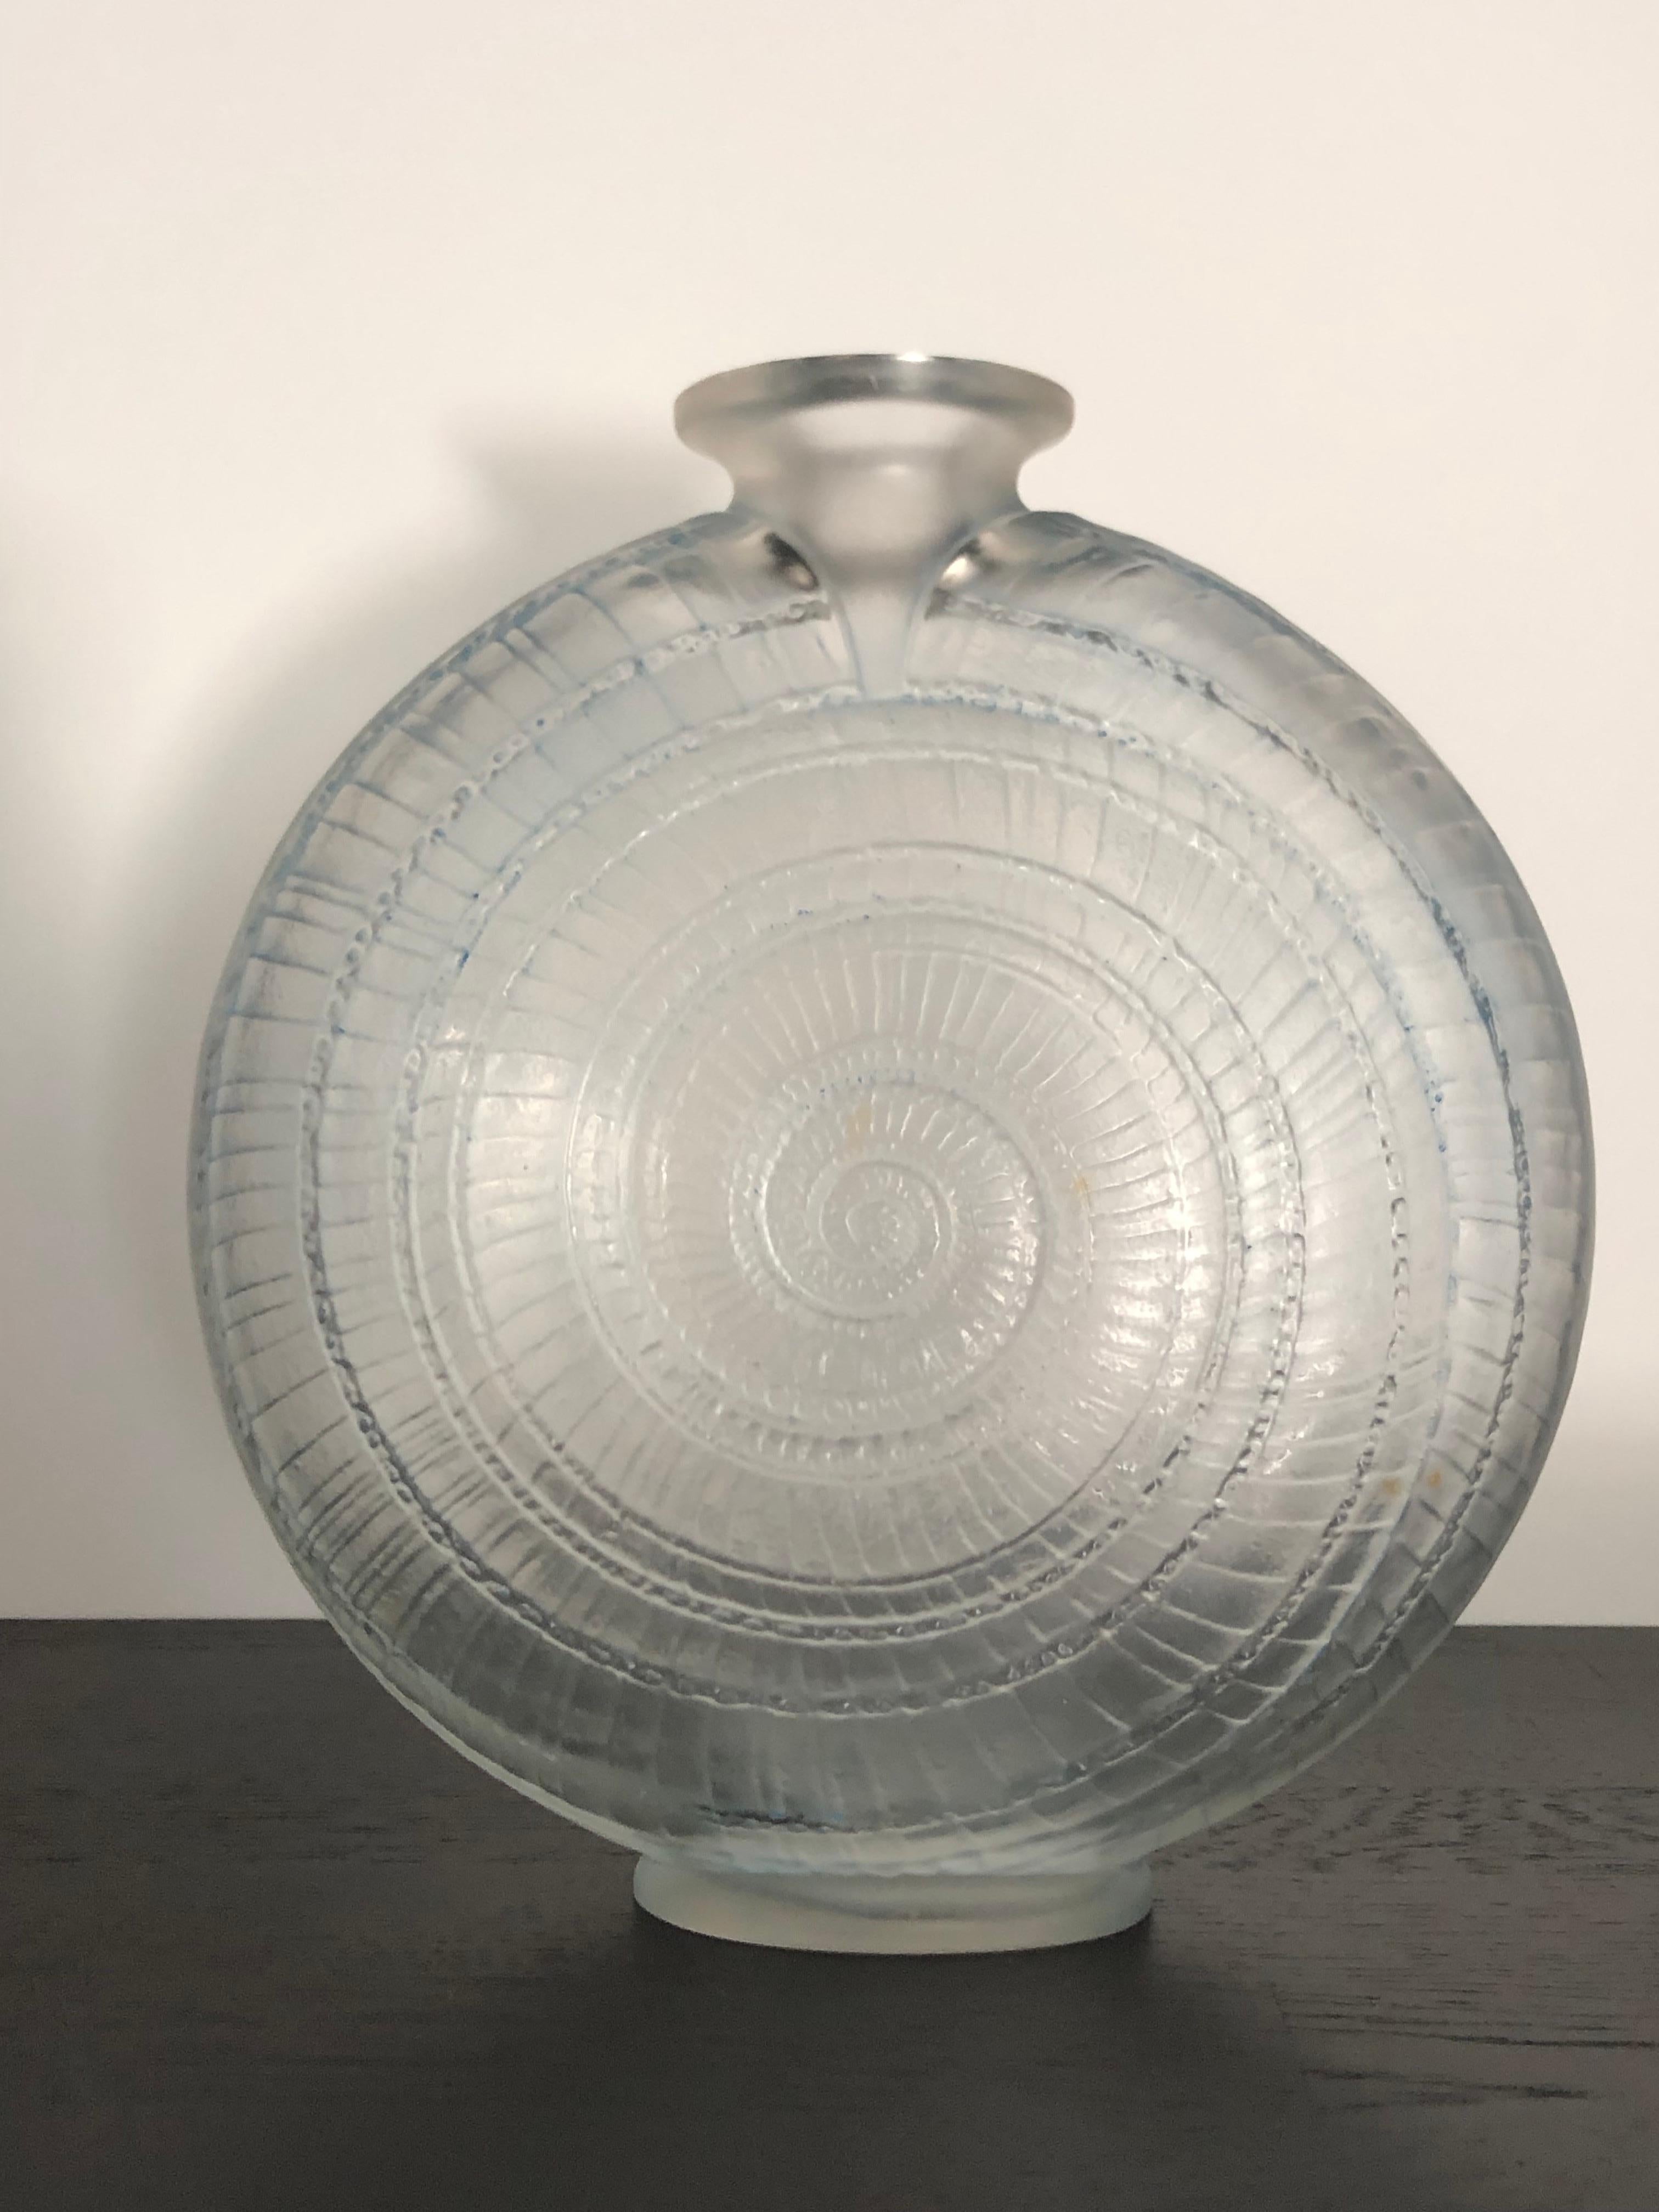 French 1920 René Lalique Escargot Vase in Frosted Glass Blue Stain - Snail